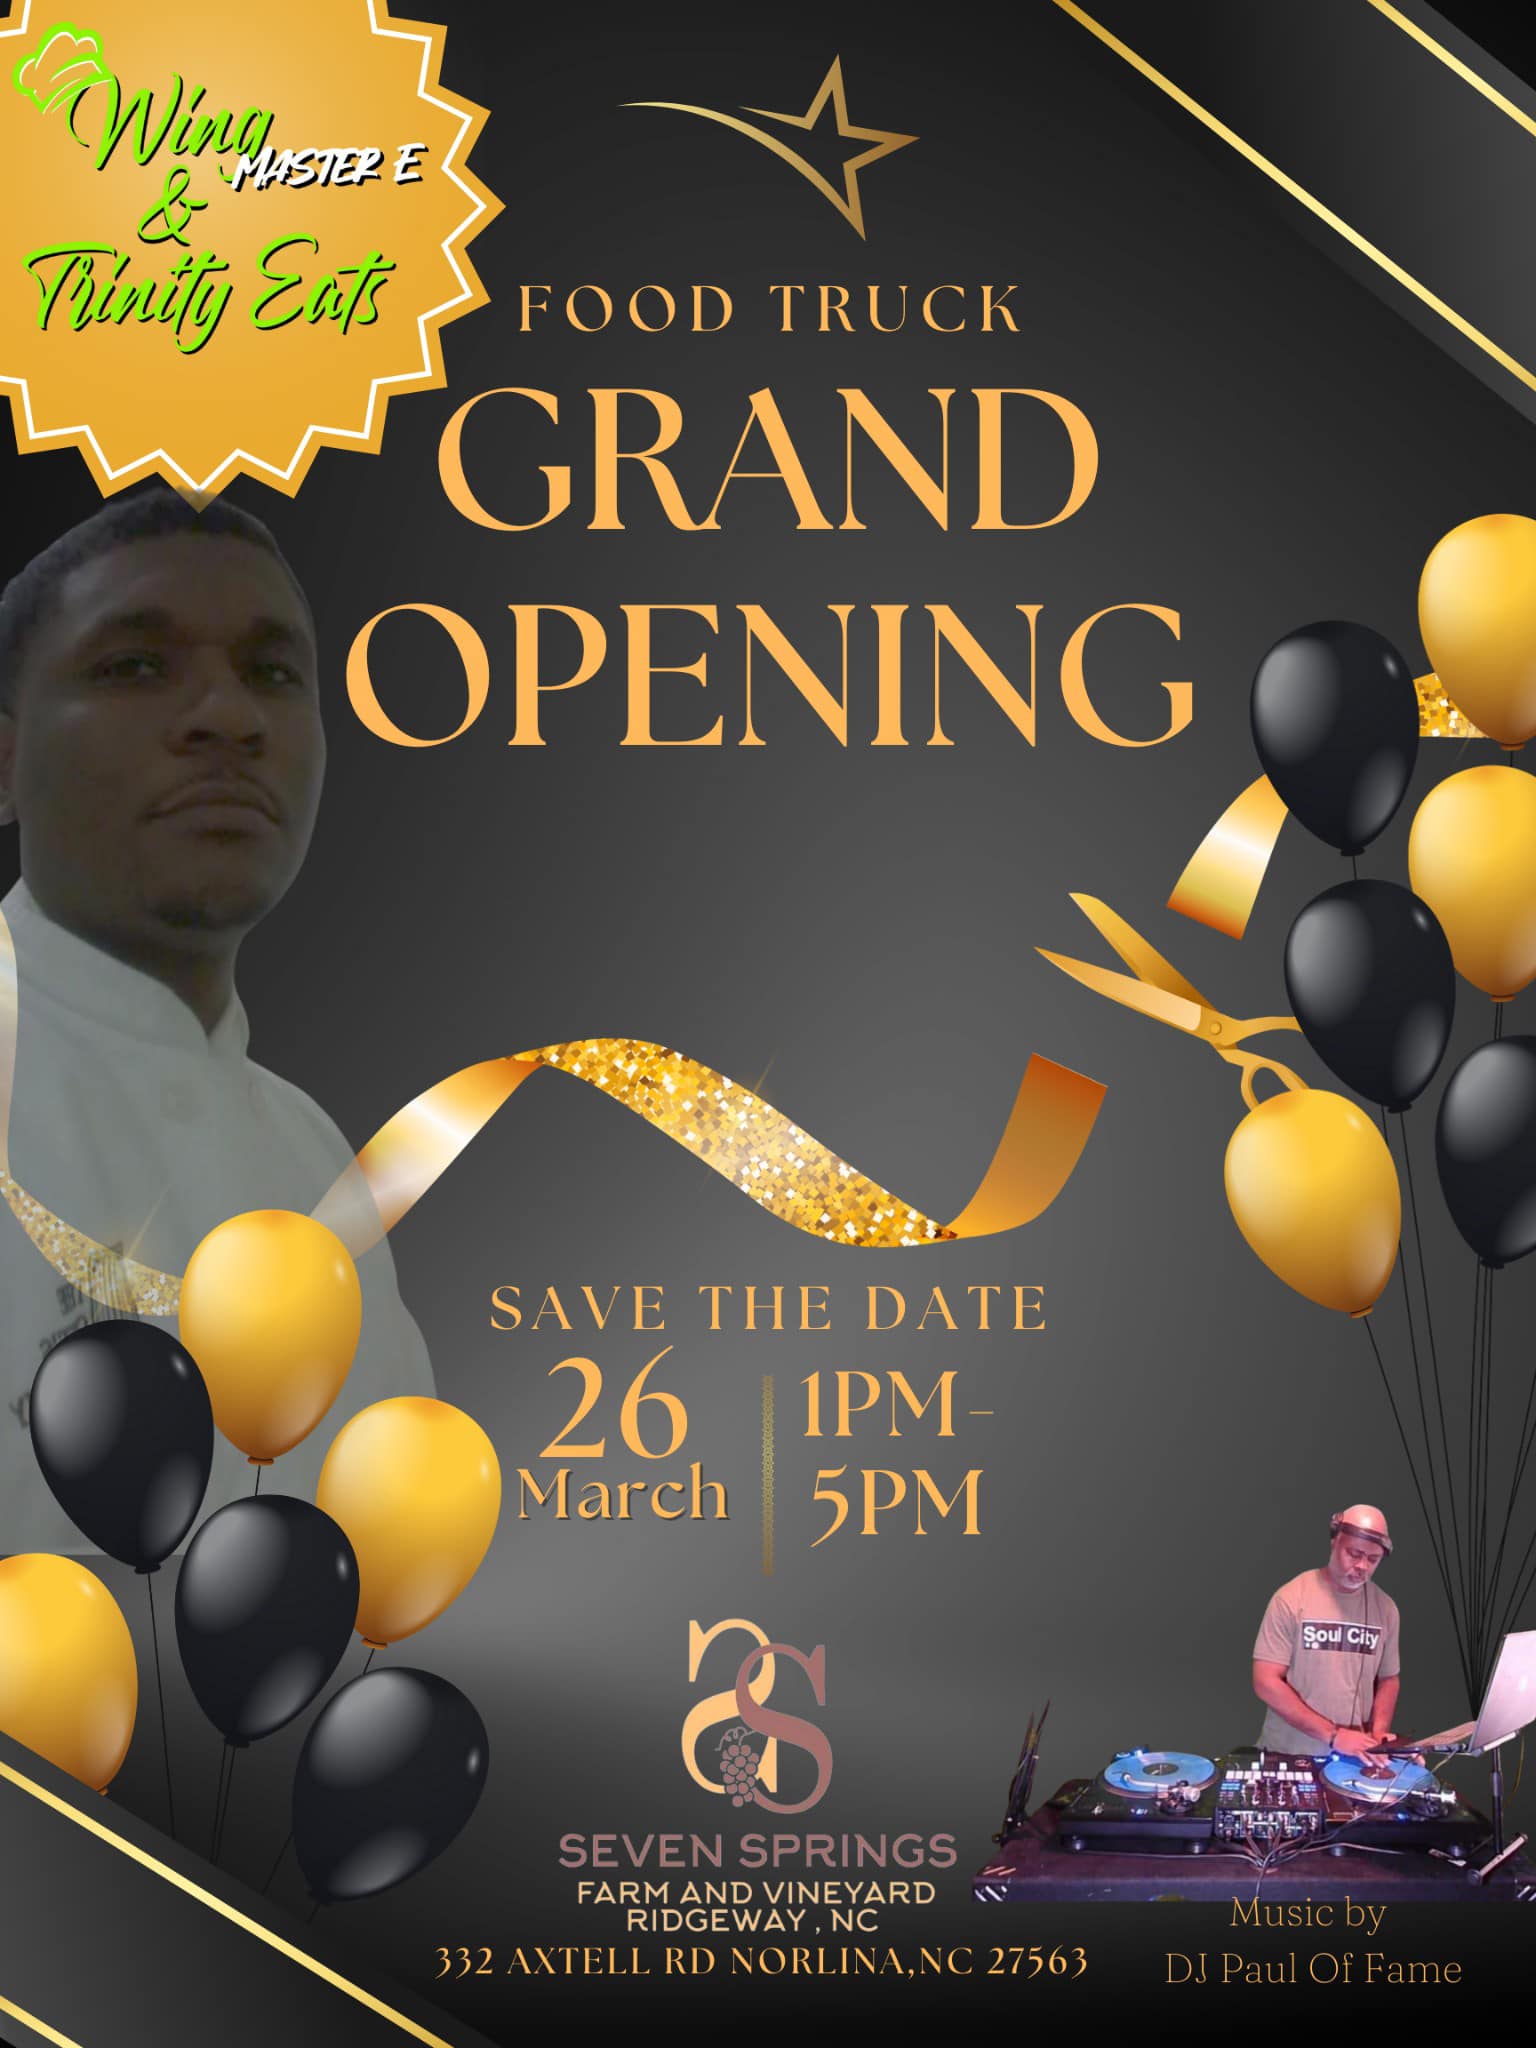 wing master e trinity eats food truck grand opening seven springs farm and vineyard march 26 2023